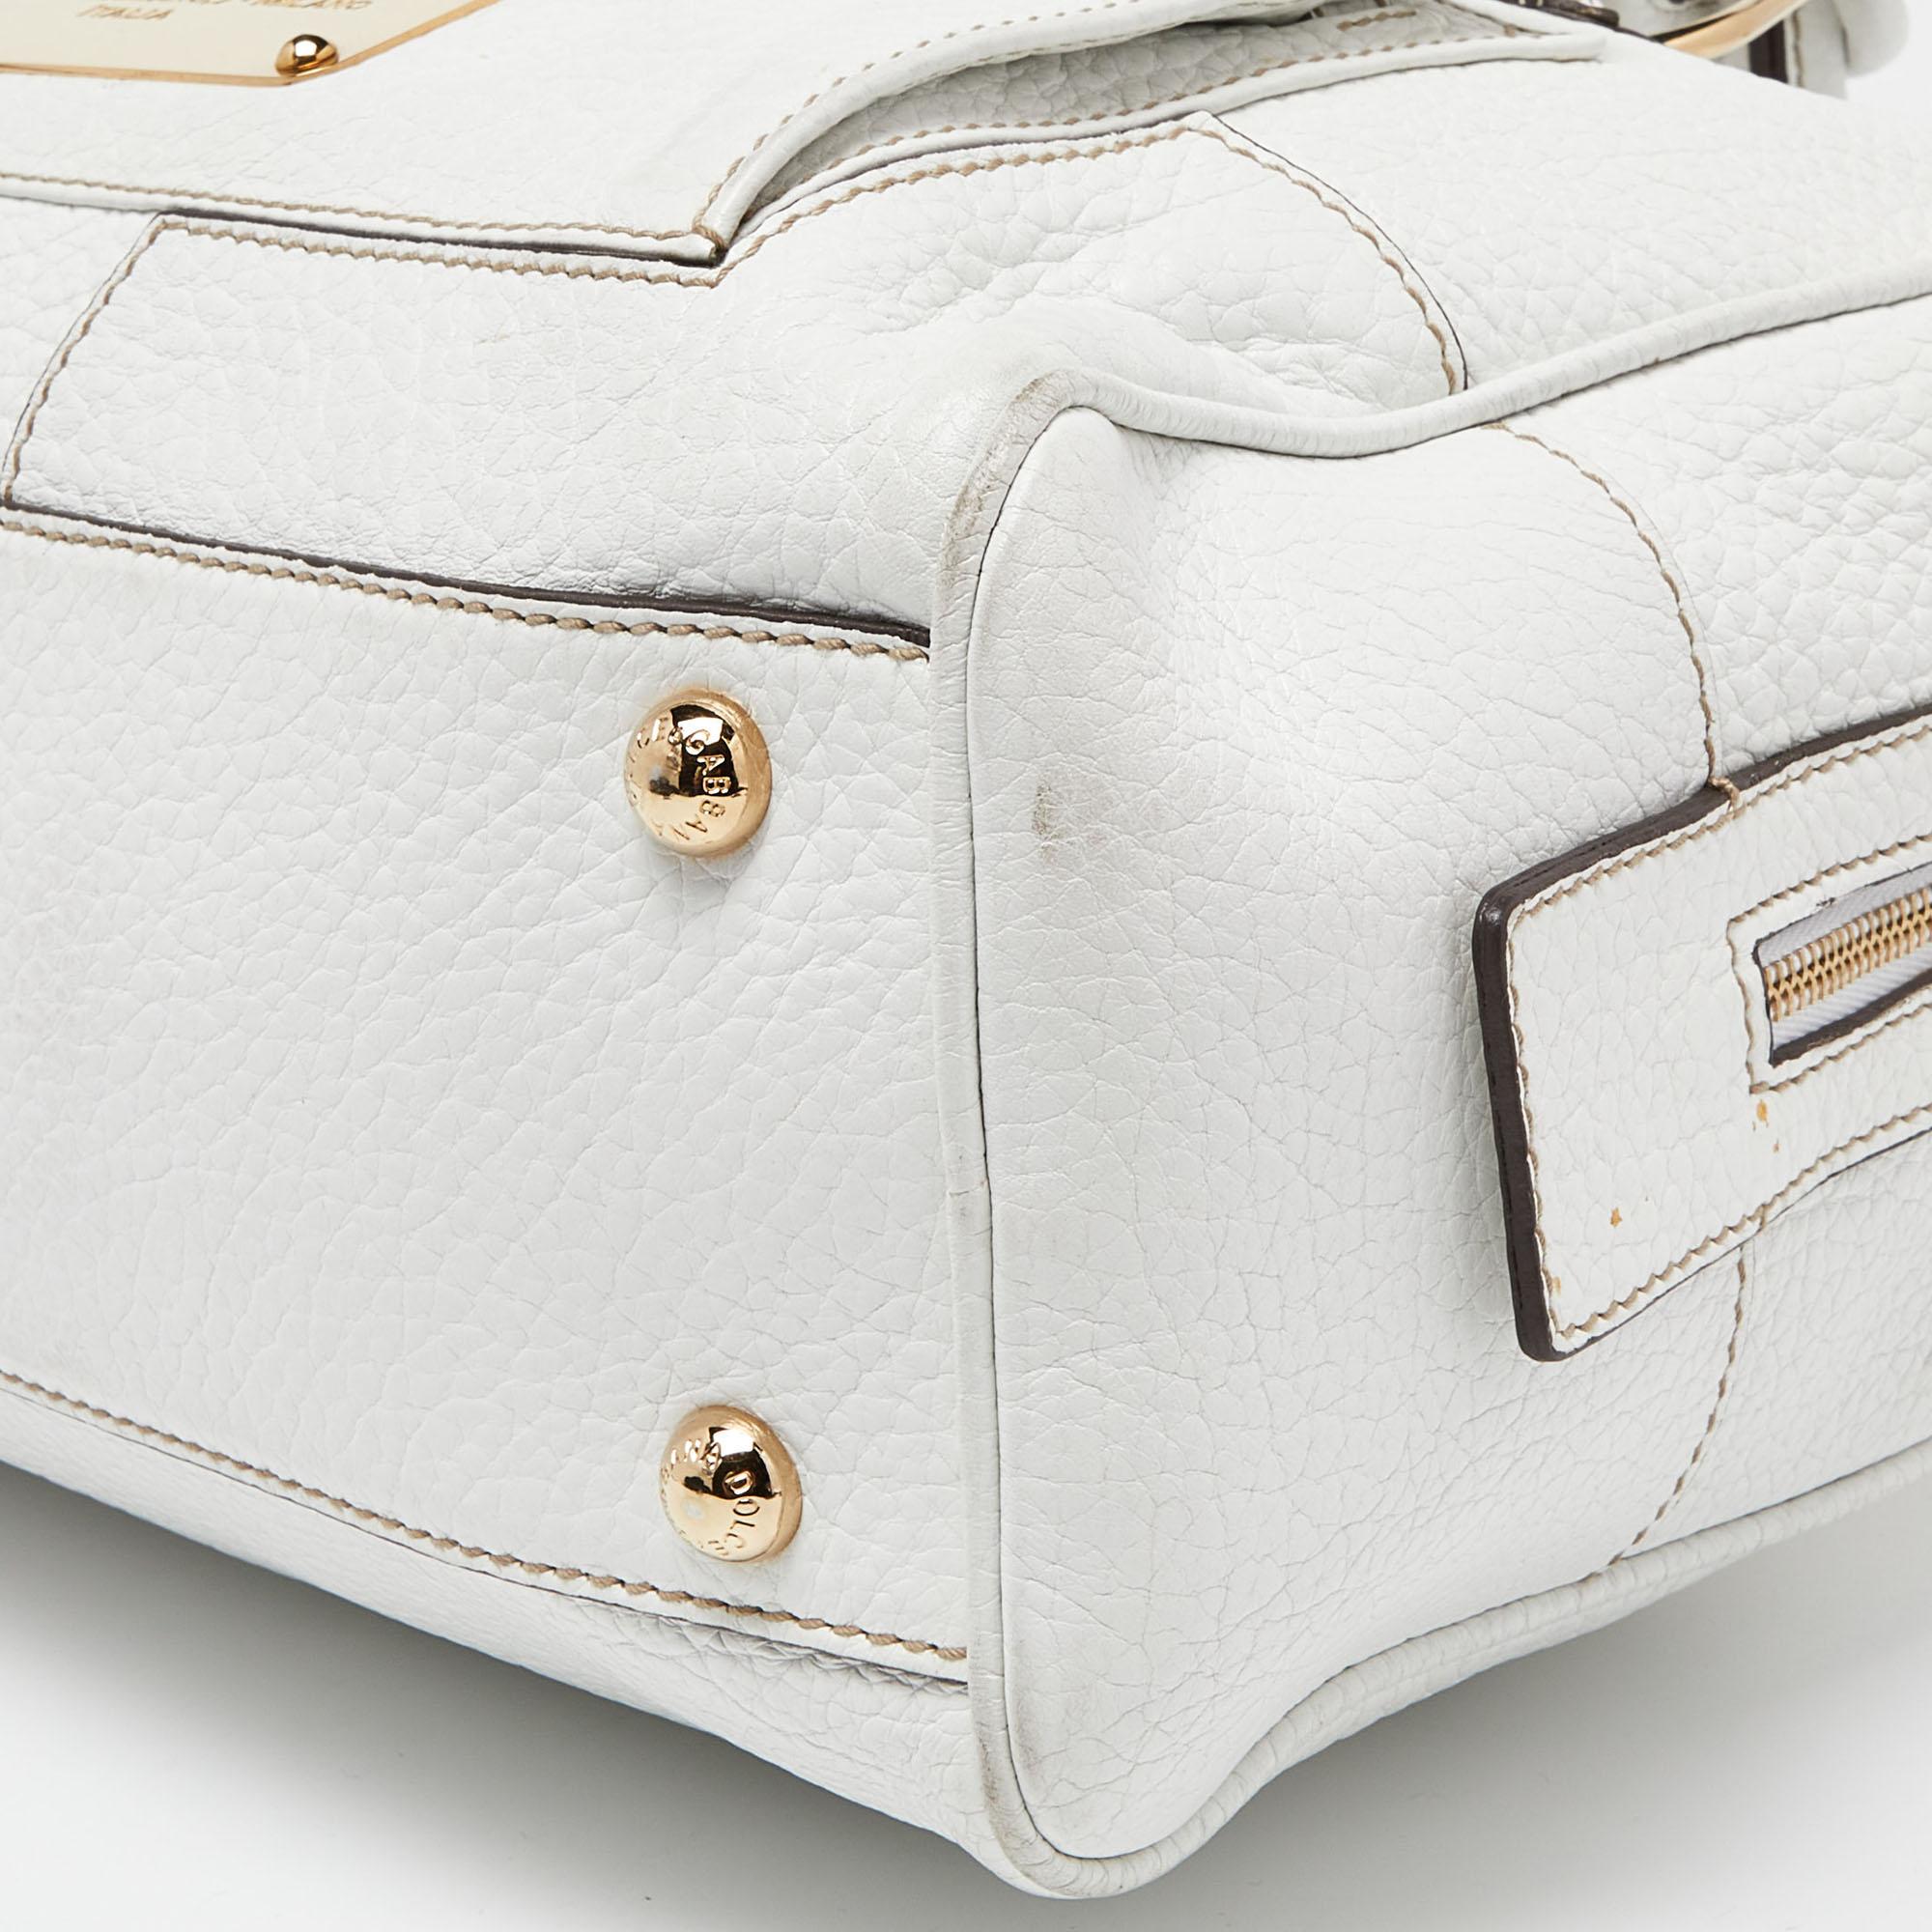 Dolce & Gabbana White Leather Buckle Satchel For Sale 2